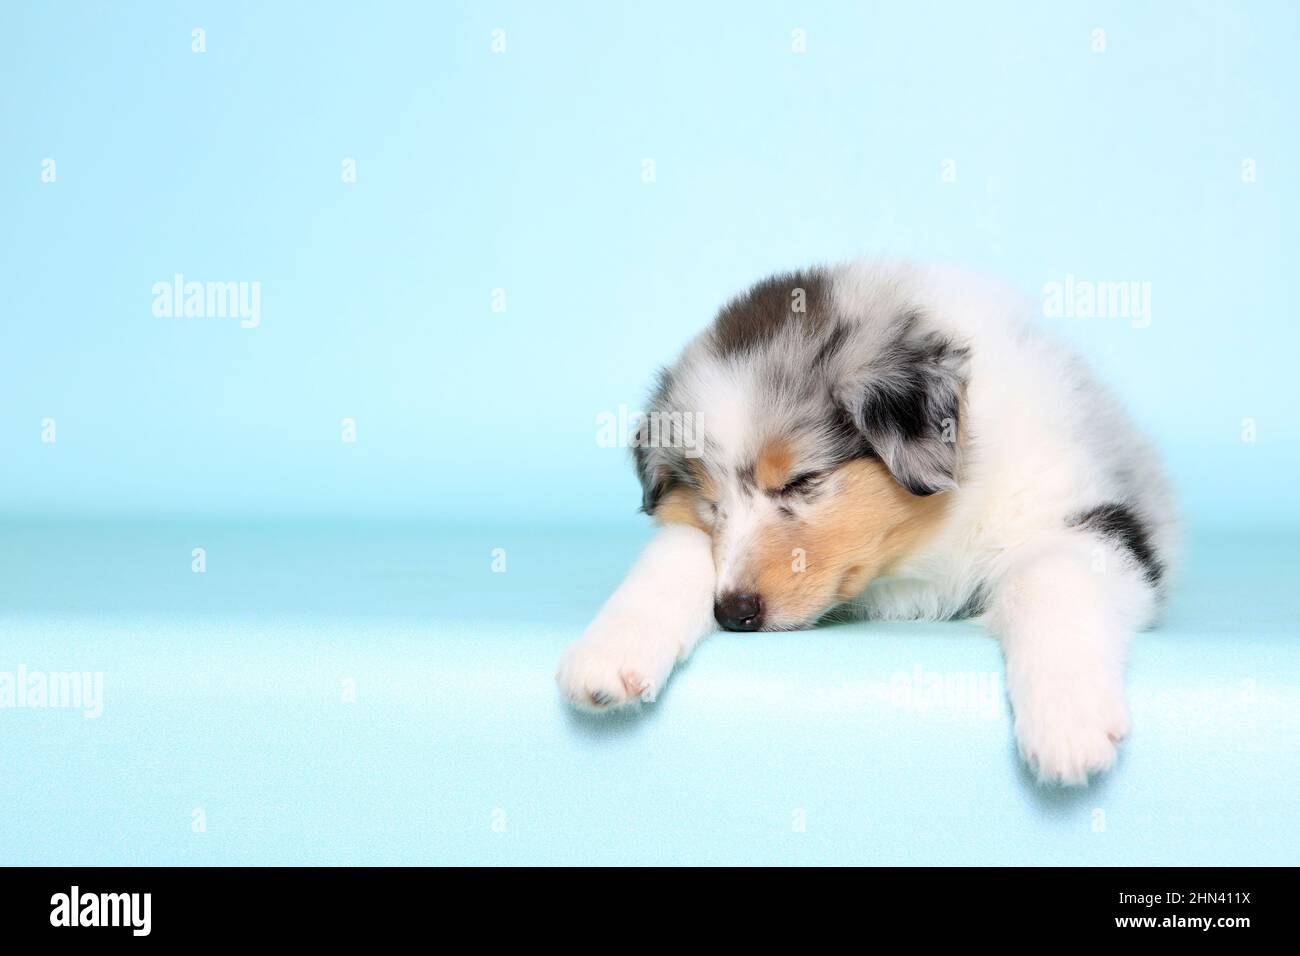 American Collie, Long-haired Collie. Puppy sleeping. Studio picture against a light-blue background. Germany Stock Photo